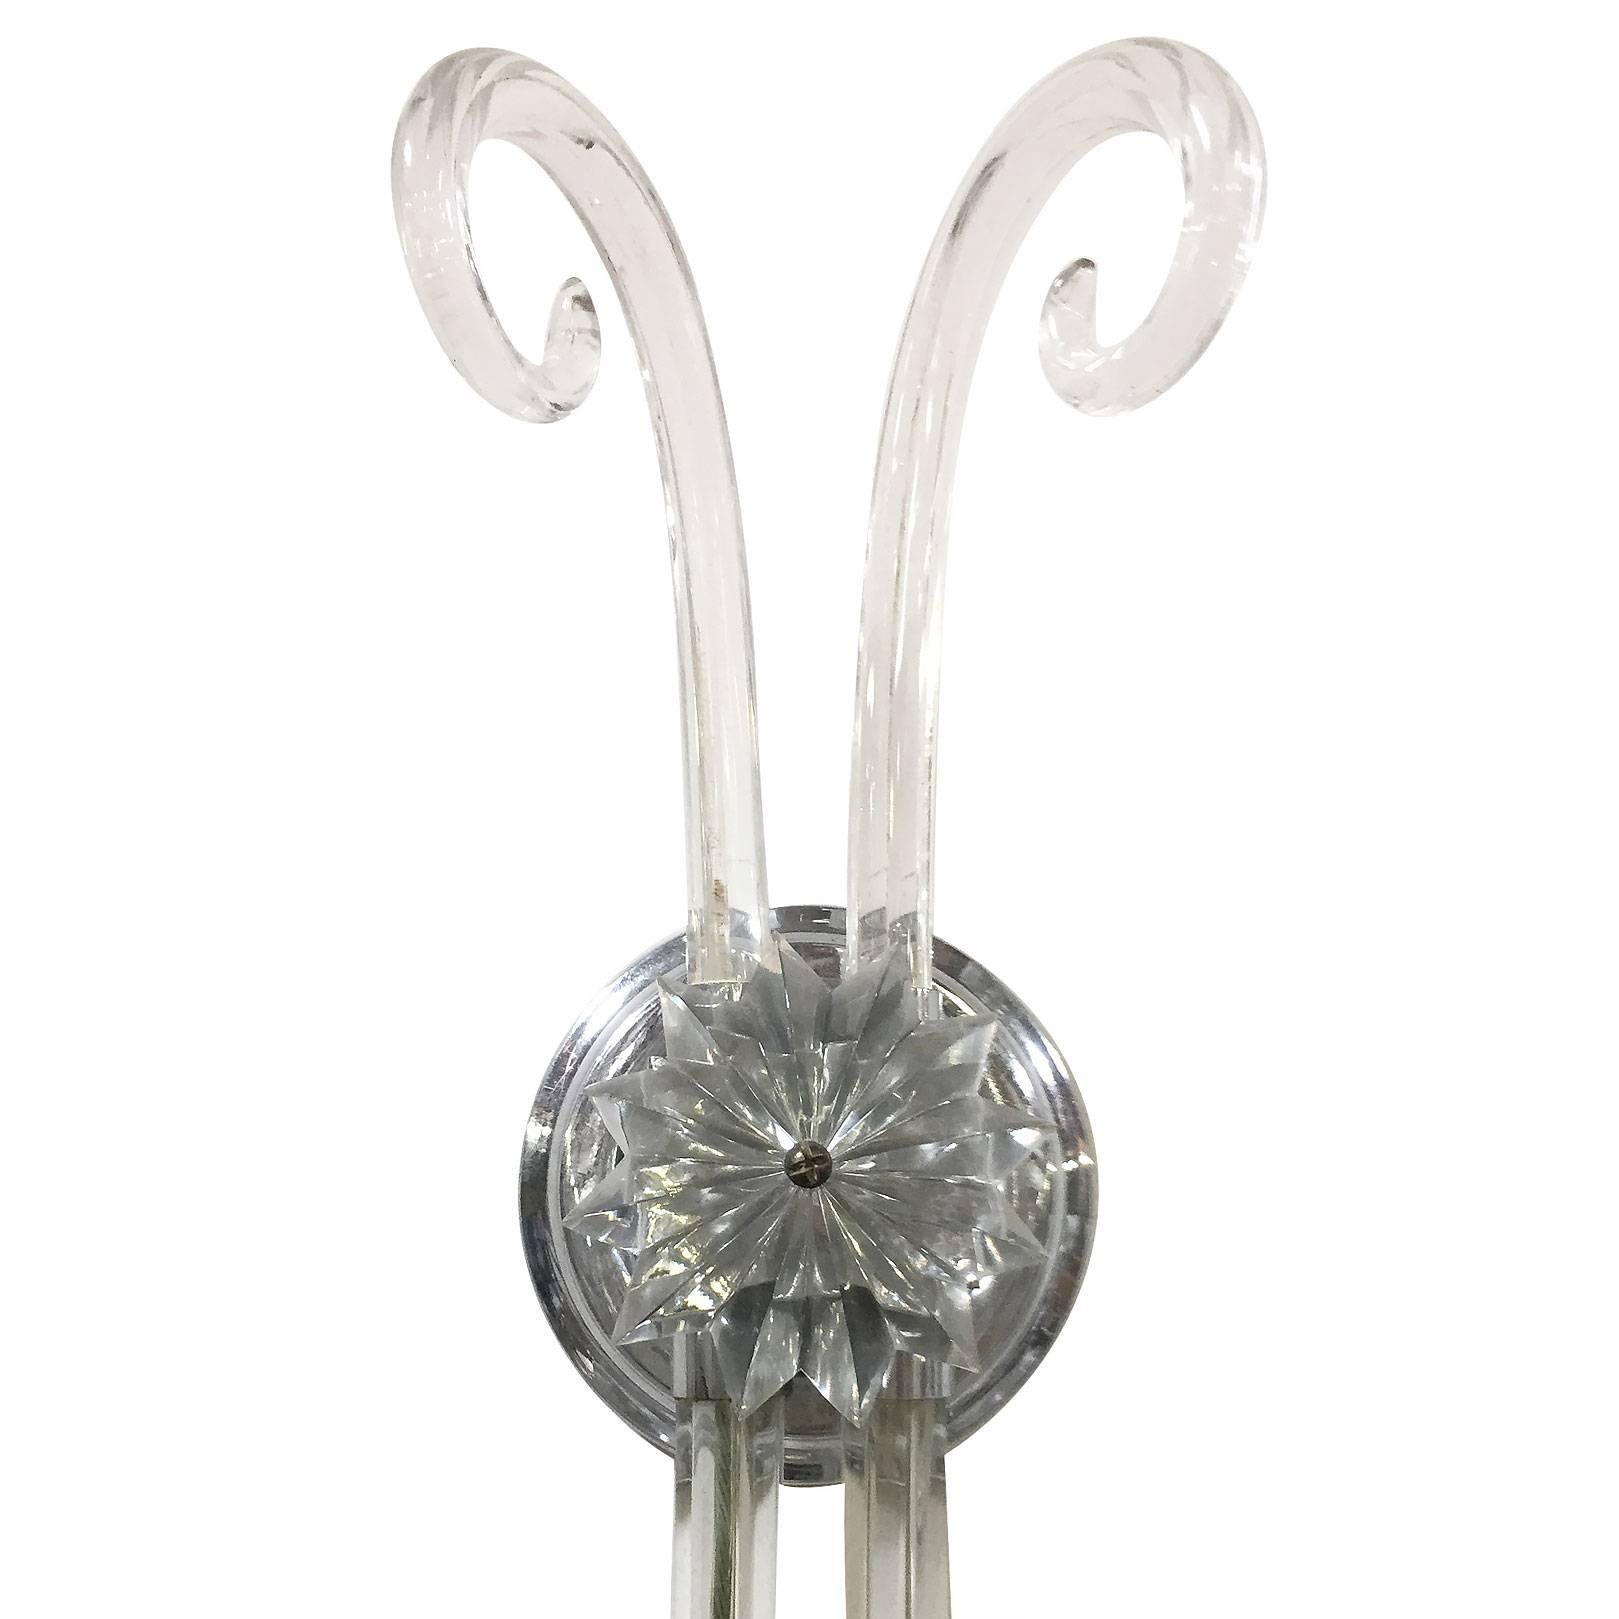 Beautiful pair of wall sconces featuring a pair scrolled crystal arms. The wall mount is adorned with a crystal cut flower.